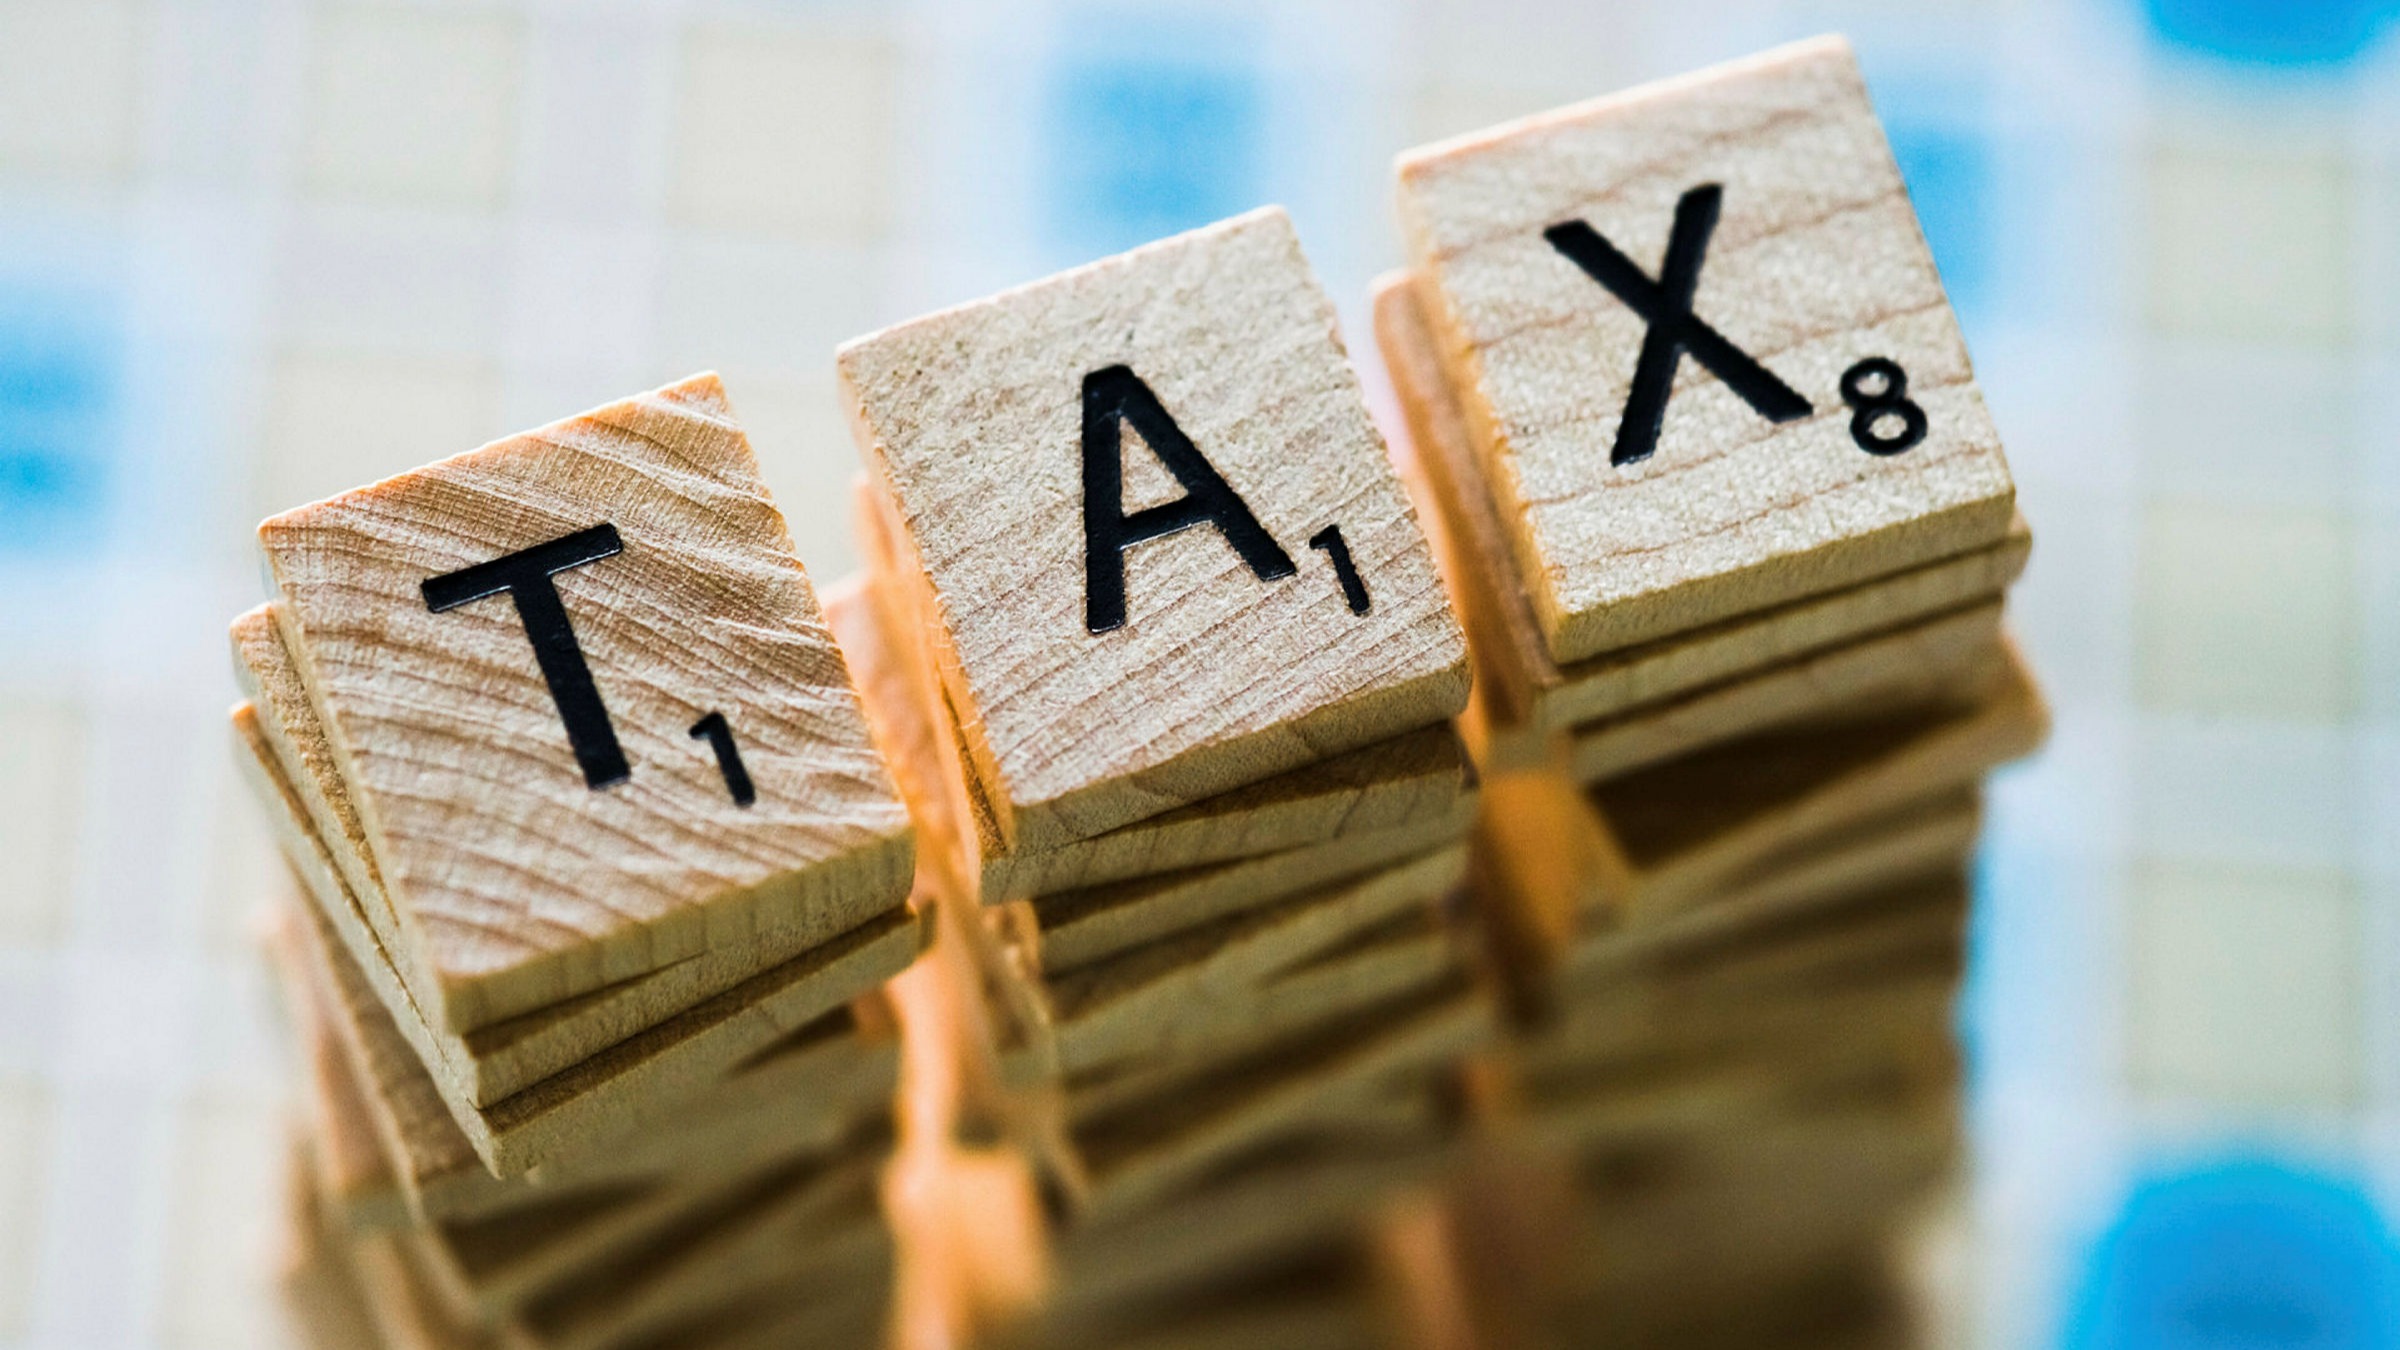 Overview of Common Types of Tax Problems